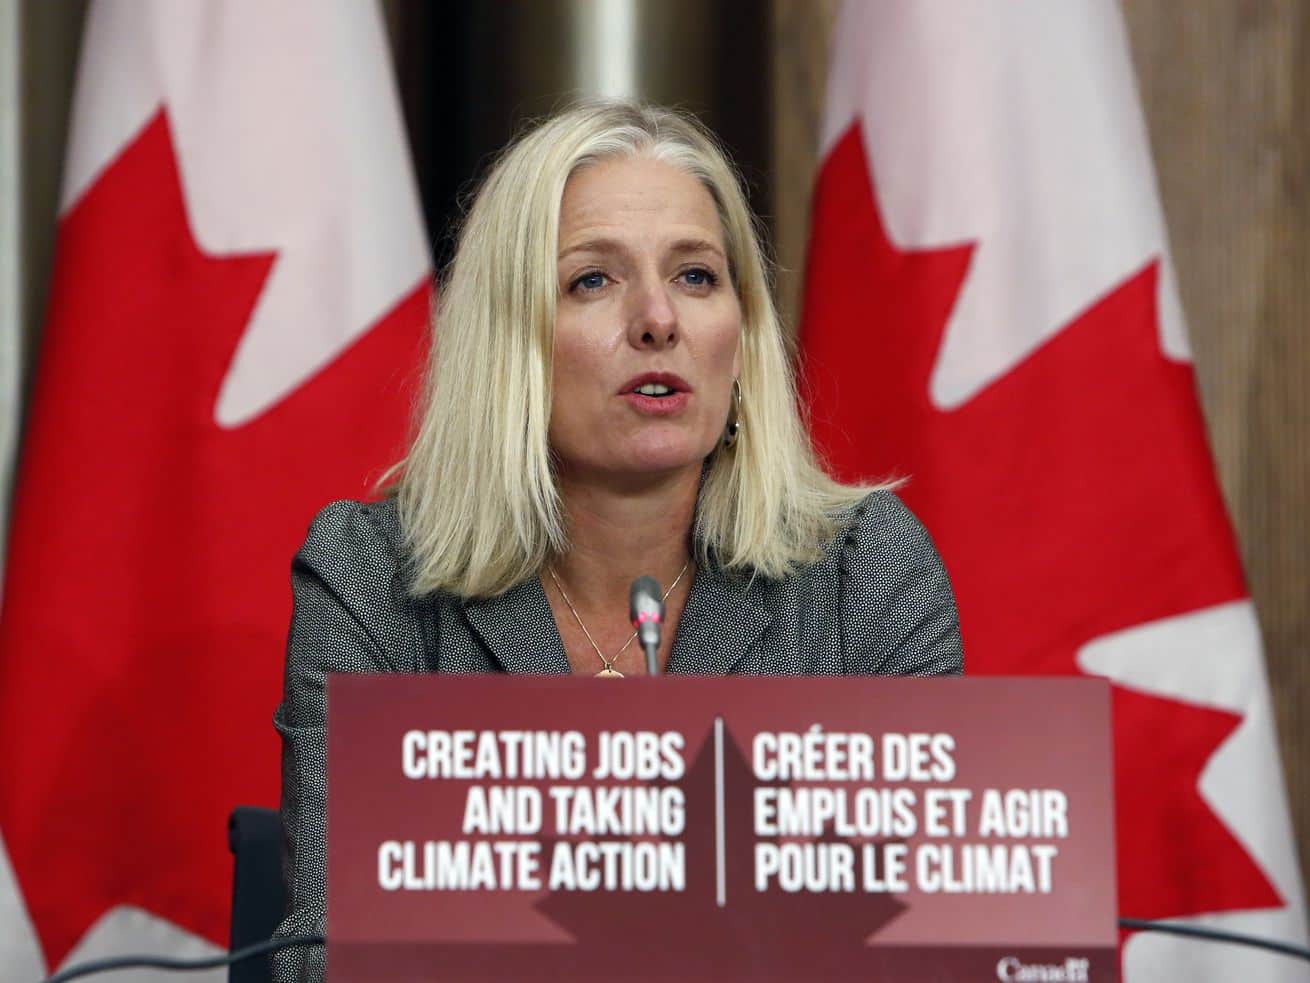 One of Canada’s top climate officials is trying to save the planet — by leaving government